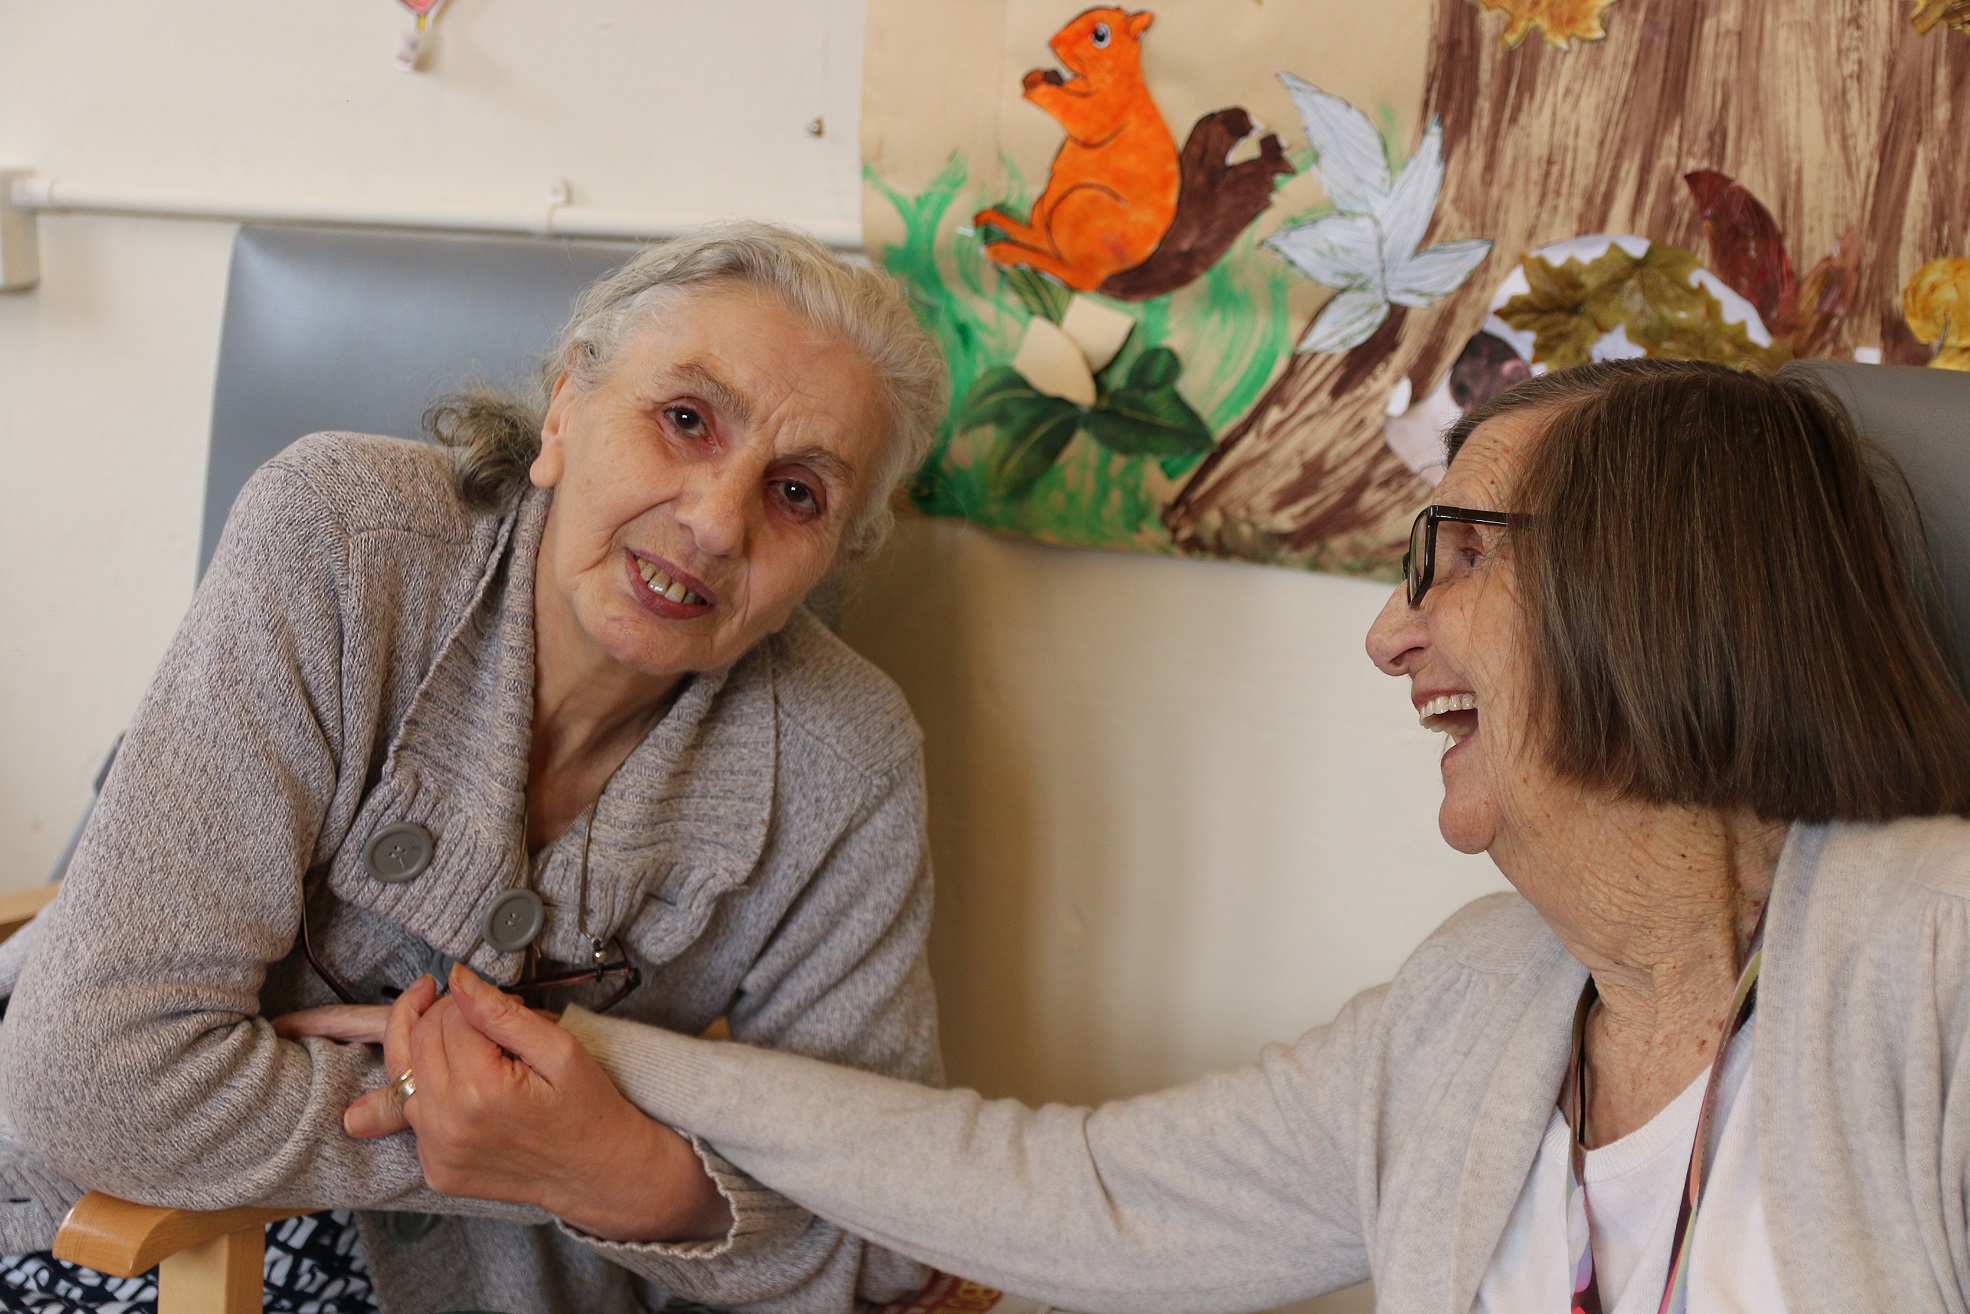 Two dementia club clients smiling and interacting